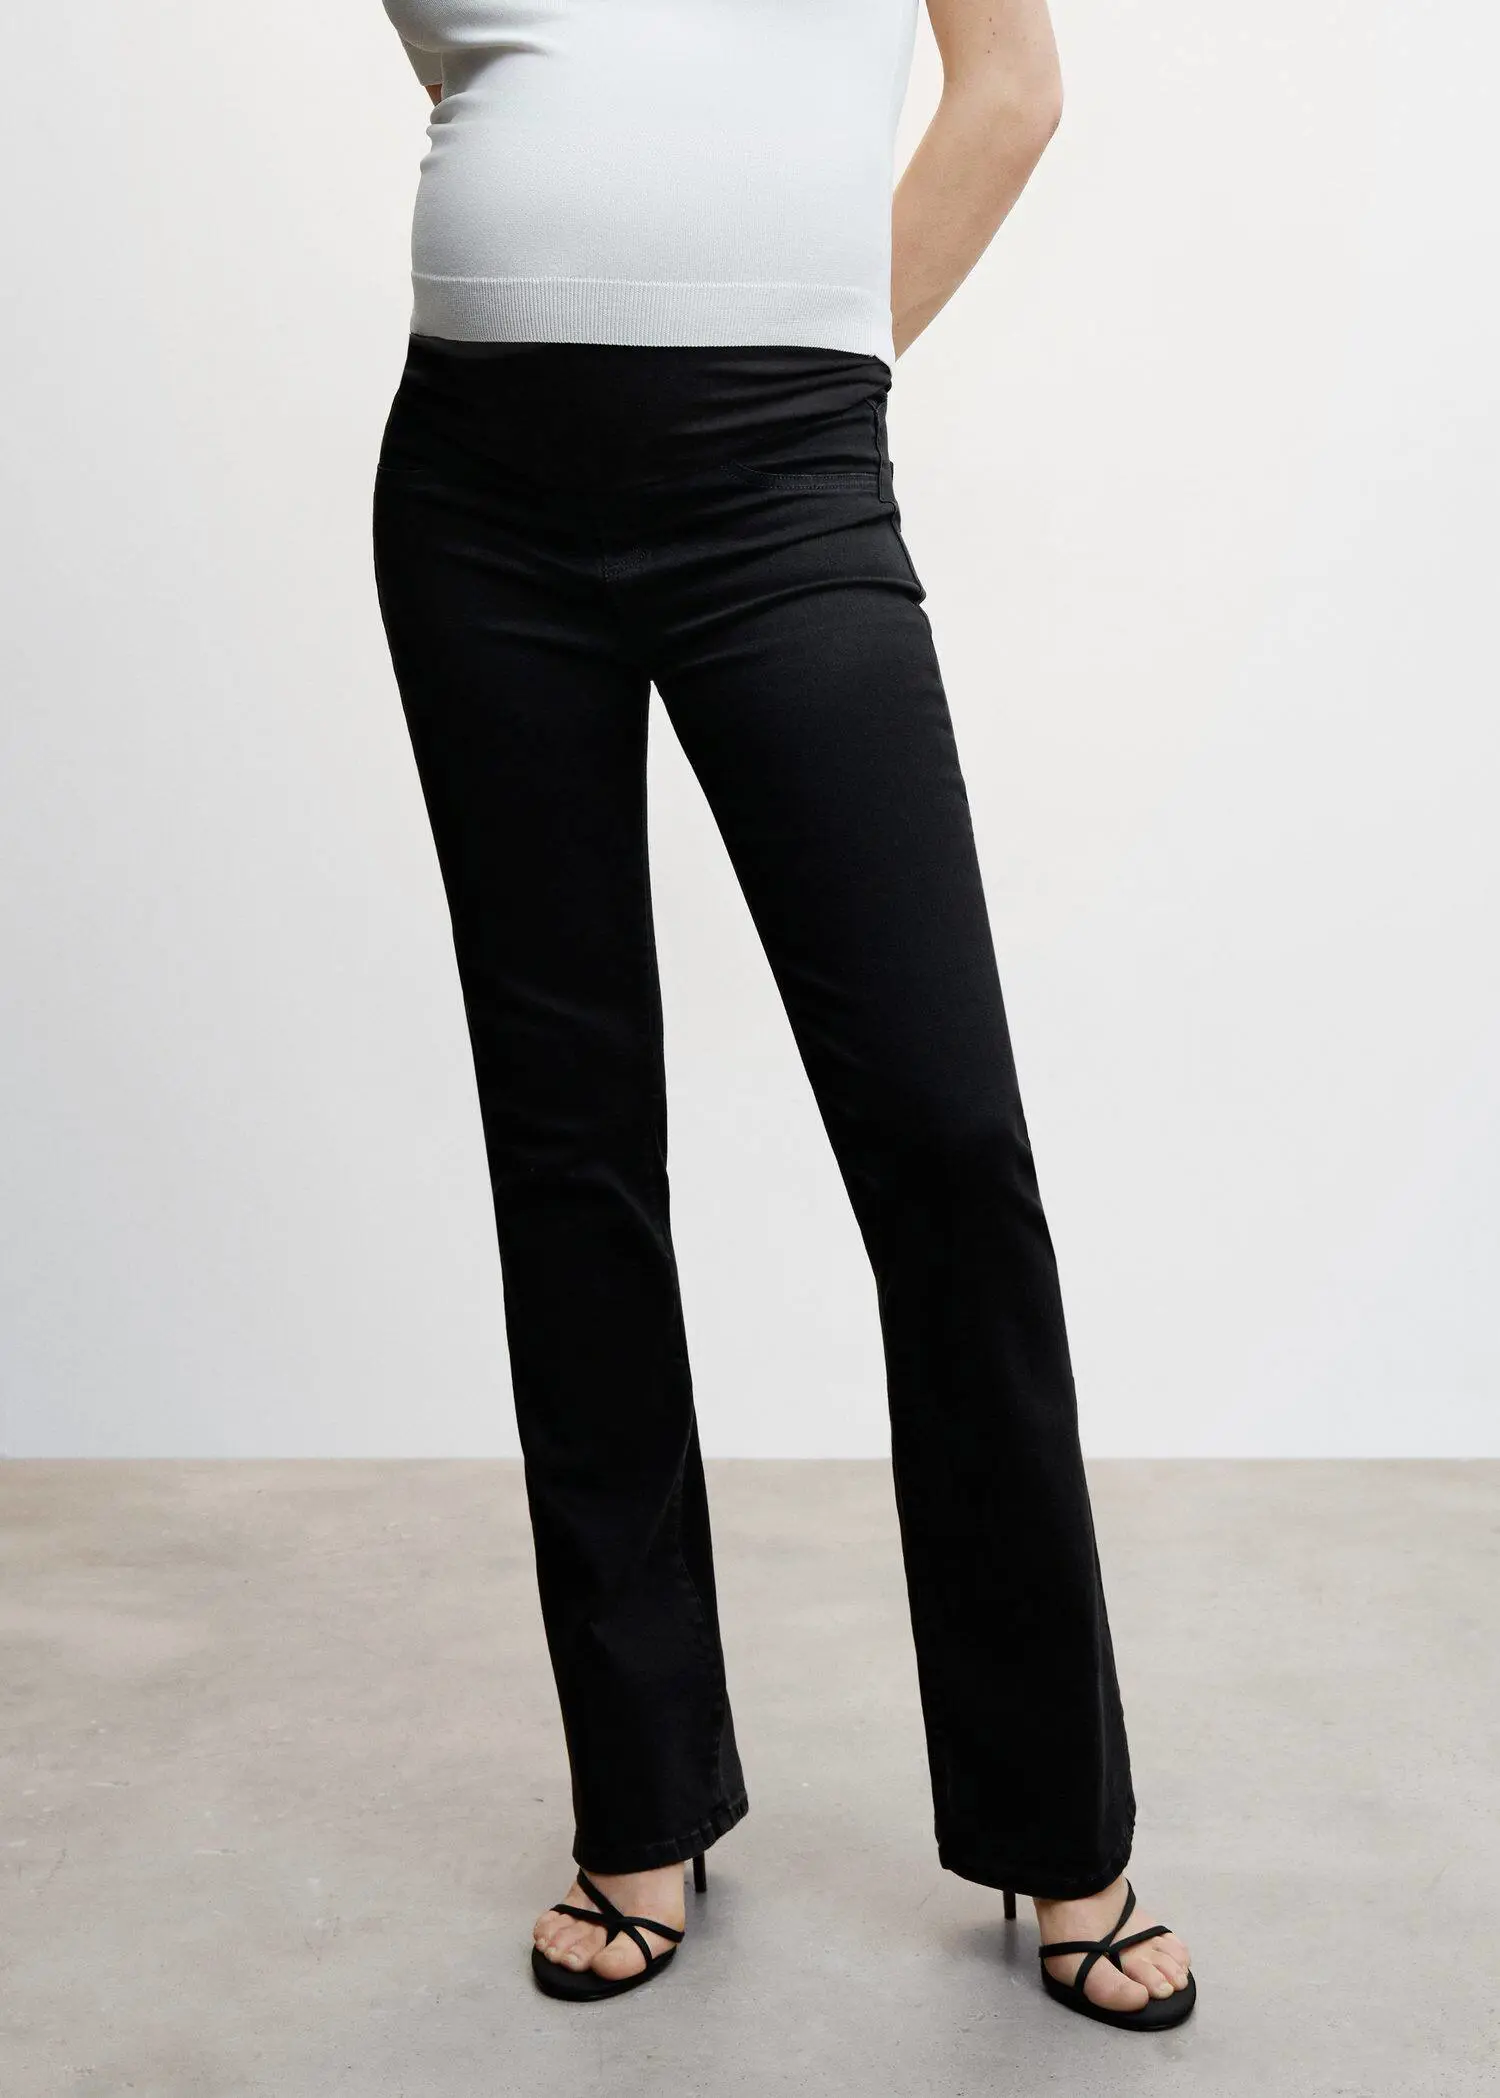 Mango Maternity flared jeans. a woman wearing black pants and a white shirt. 